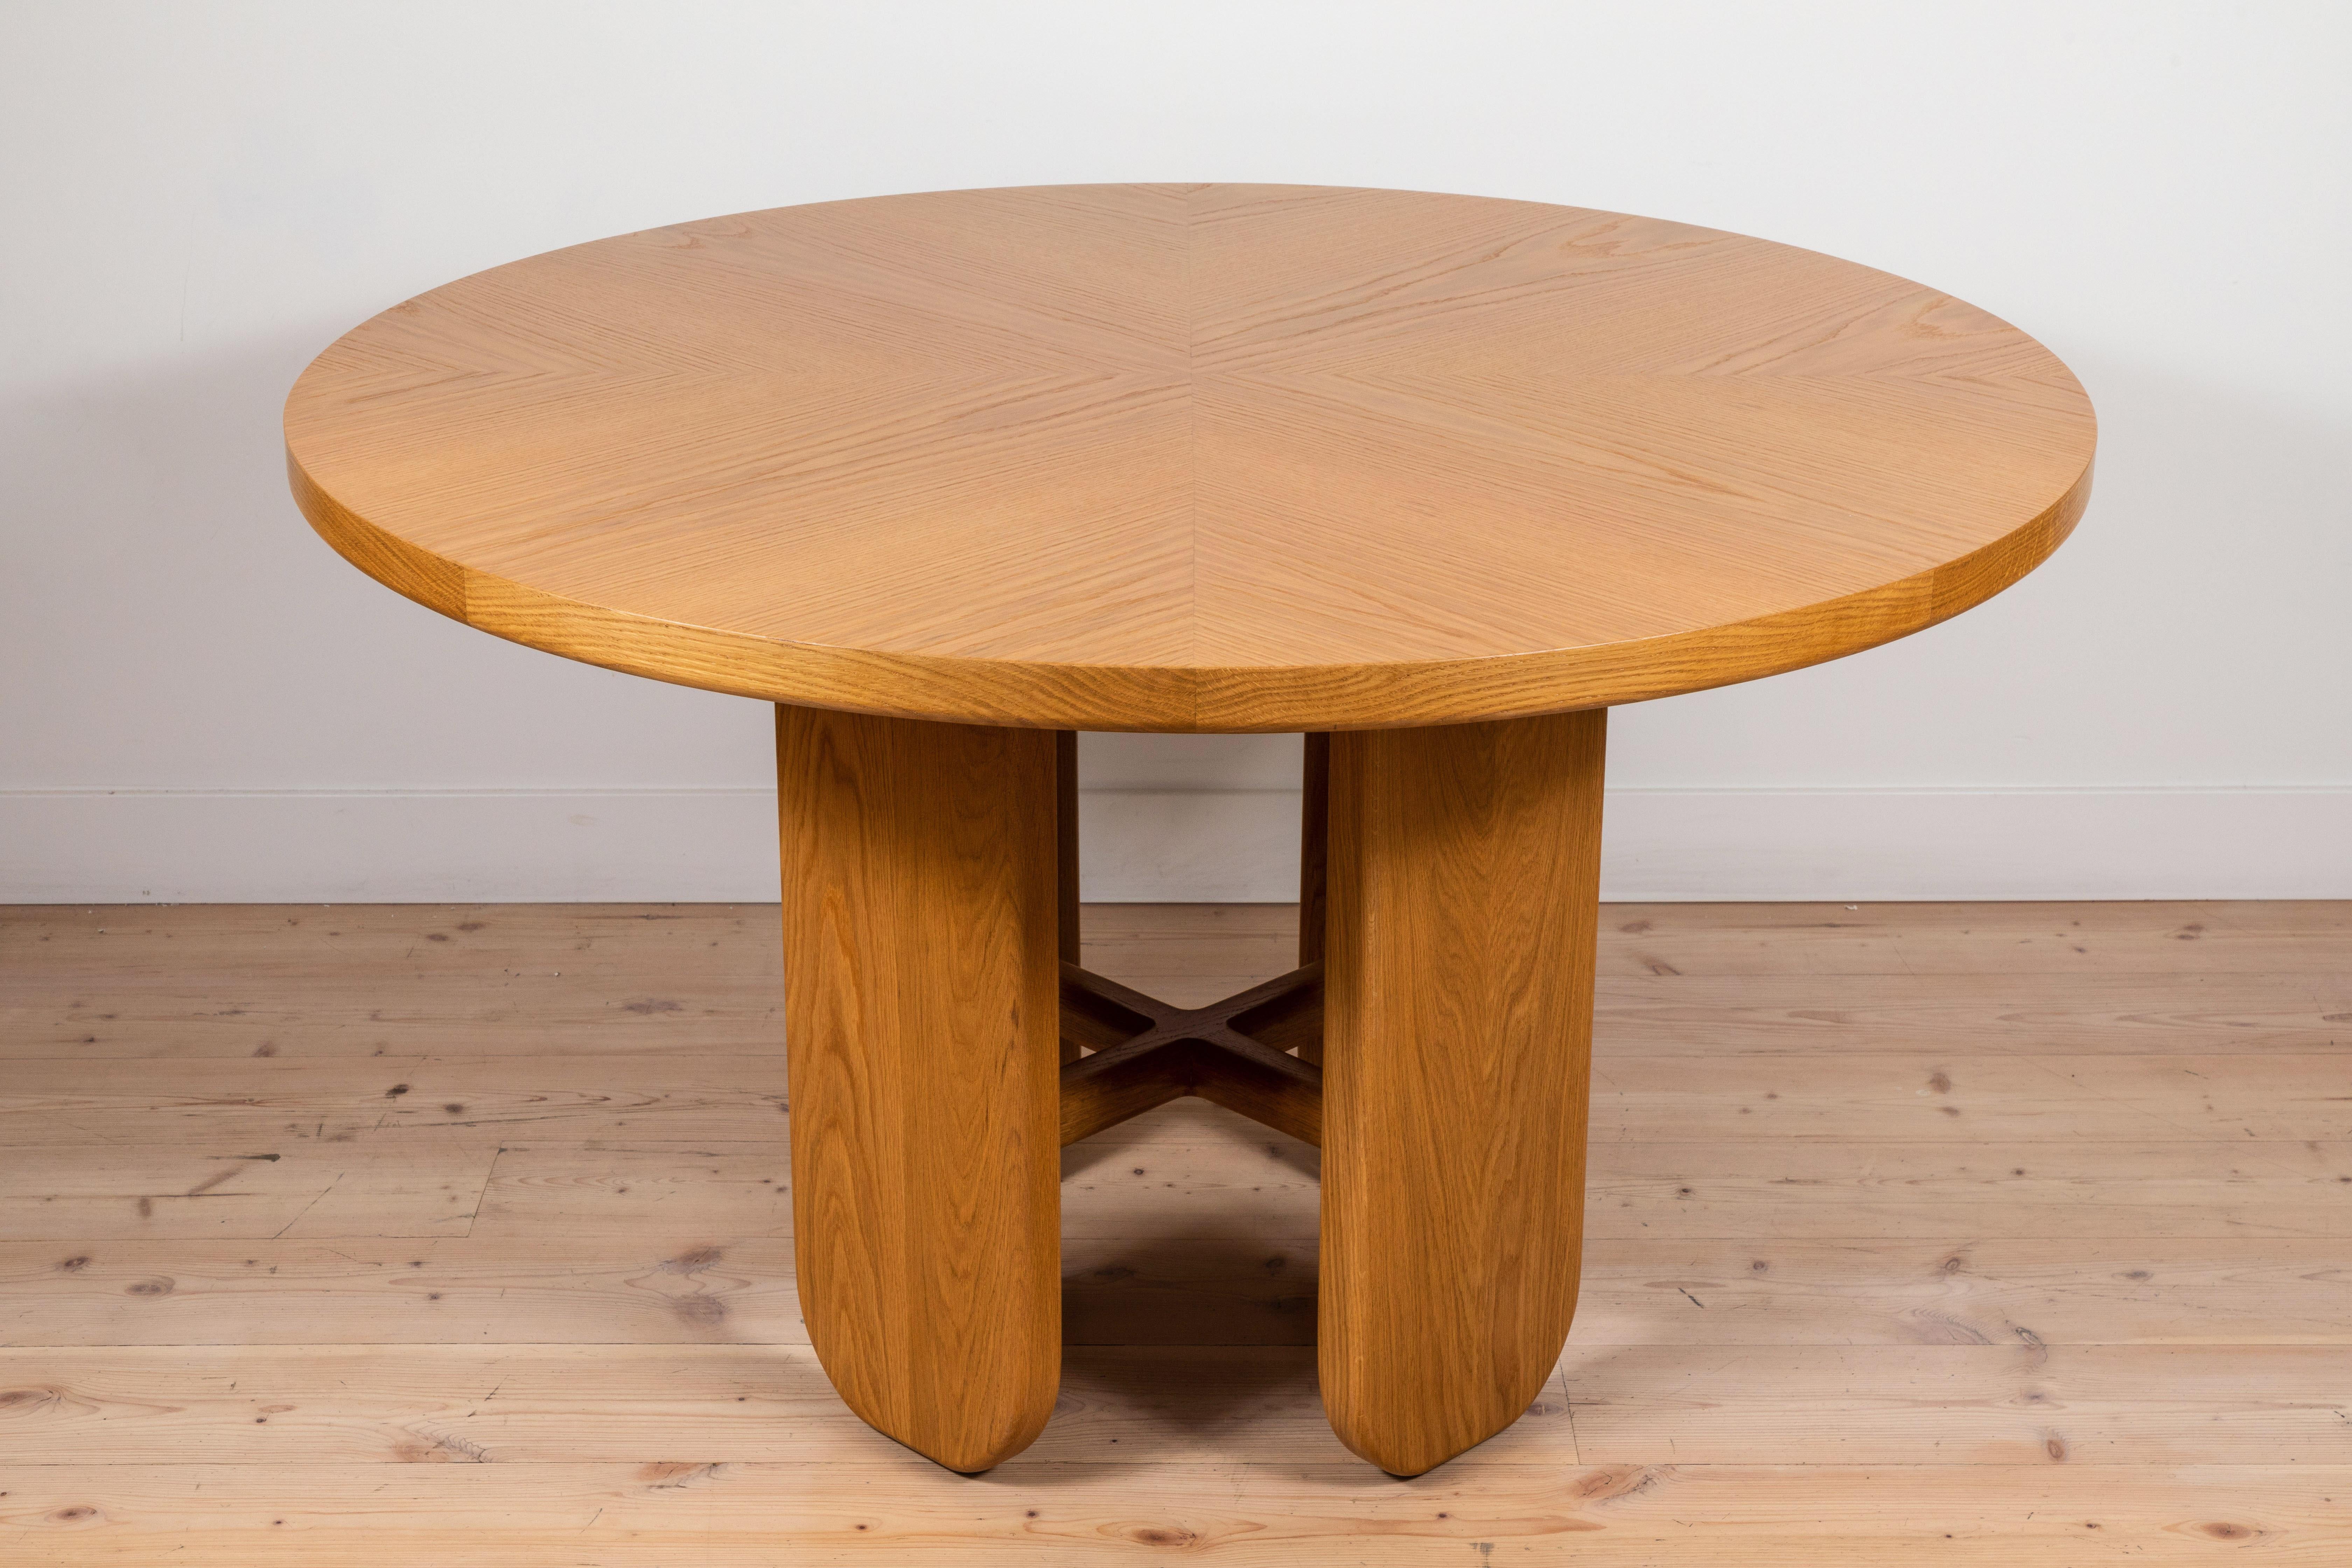 The Rainier Dining Table is part of the collaborative collection with interior designer Brian Paquette. The Rainier Dining Table features a parquet wood top and four pedestal legs connected with a solid wood stretcher. This piece is available in